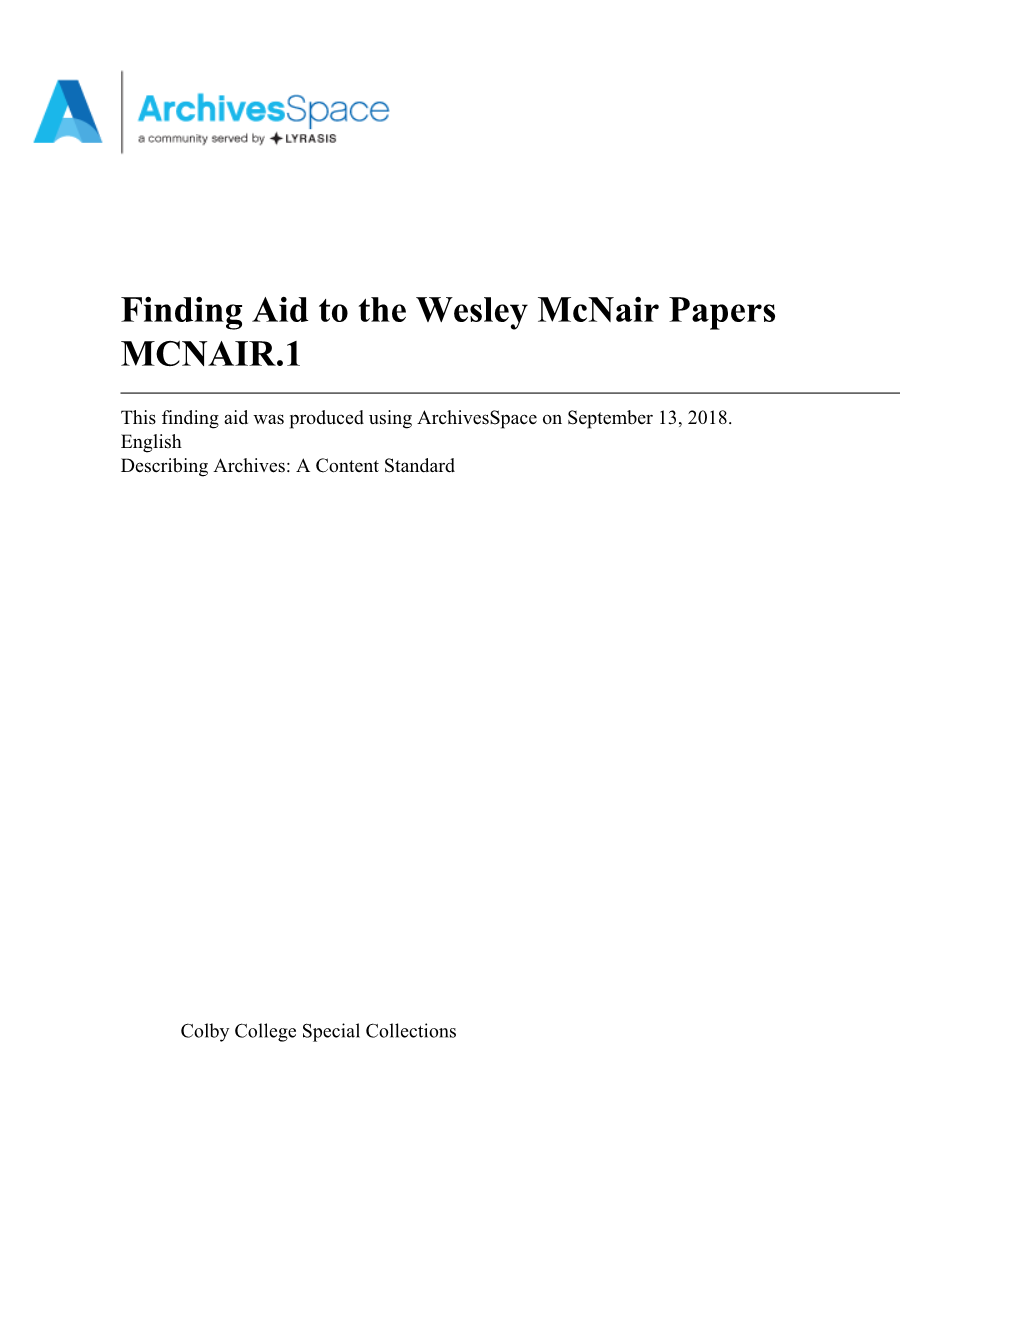 Finding Aid to the Wesley Mcnair Papers MCNAIR.1